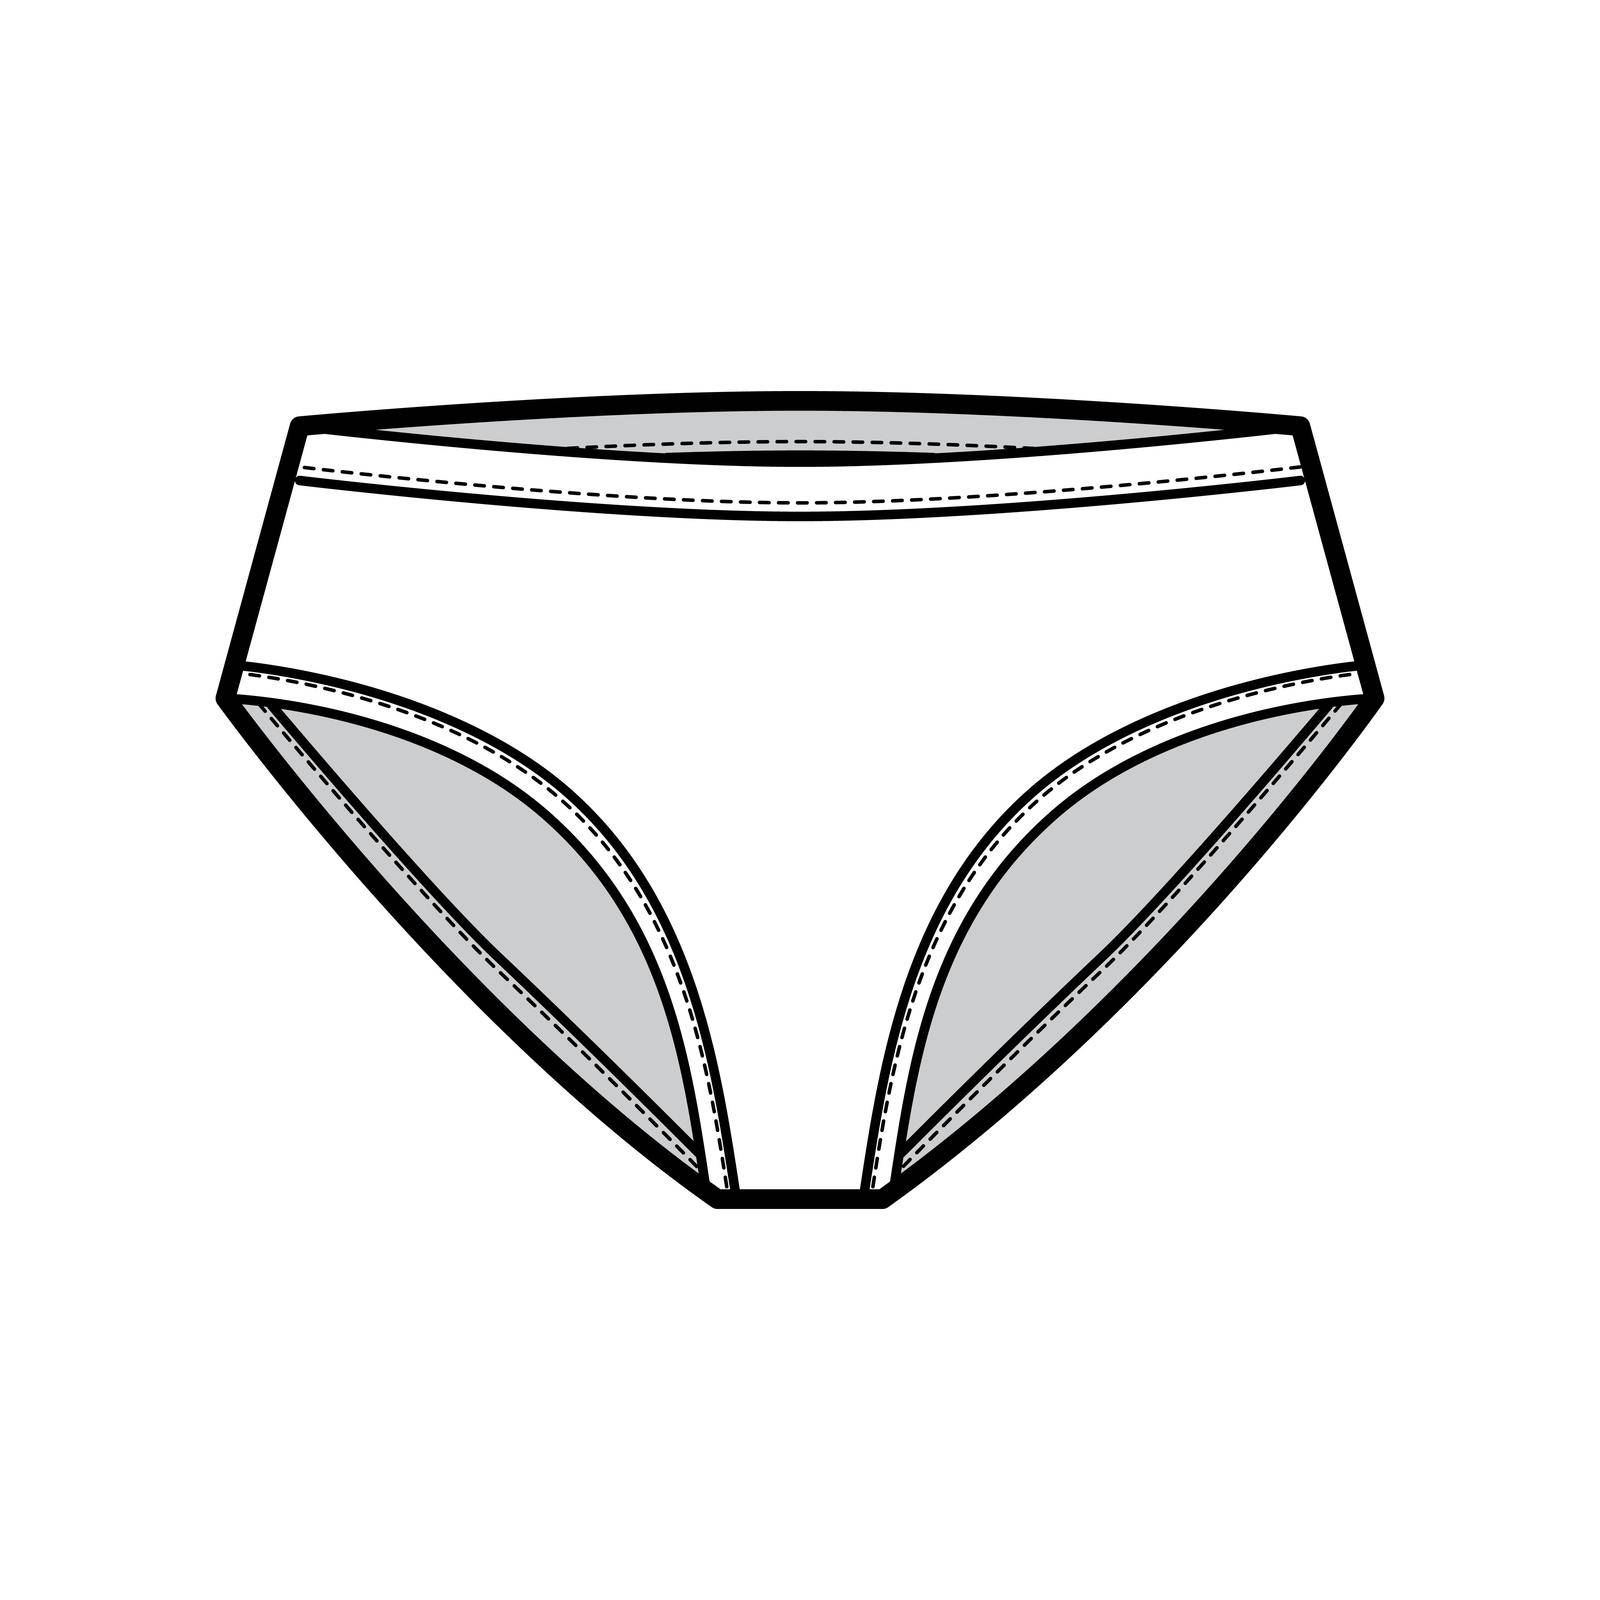 High-cut briefs technical fashion illustration with mid hips coverage and waist rise. Flat Mini-short panties bikini lingerie template front, white color. Women men unisex underwear CAD mockup